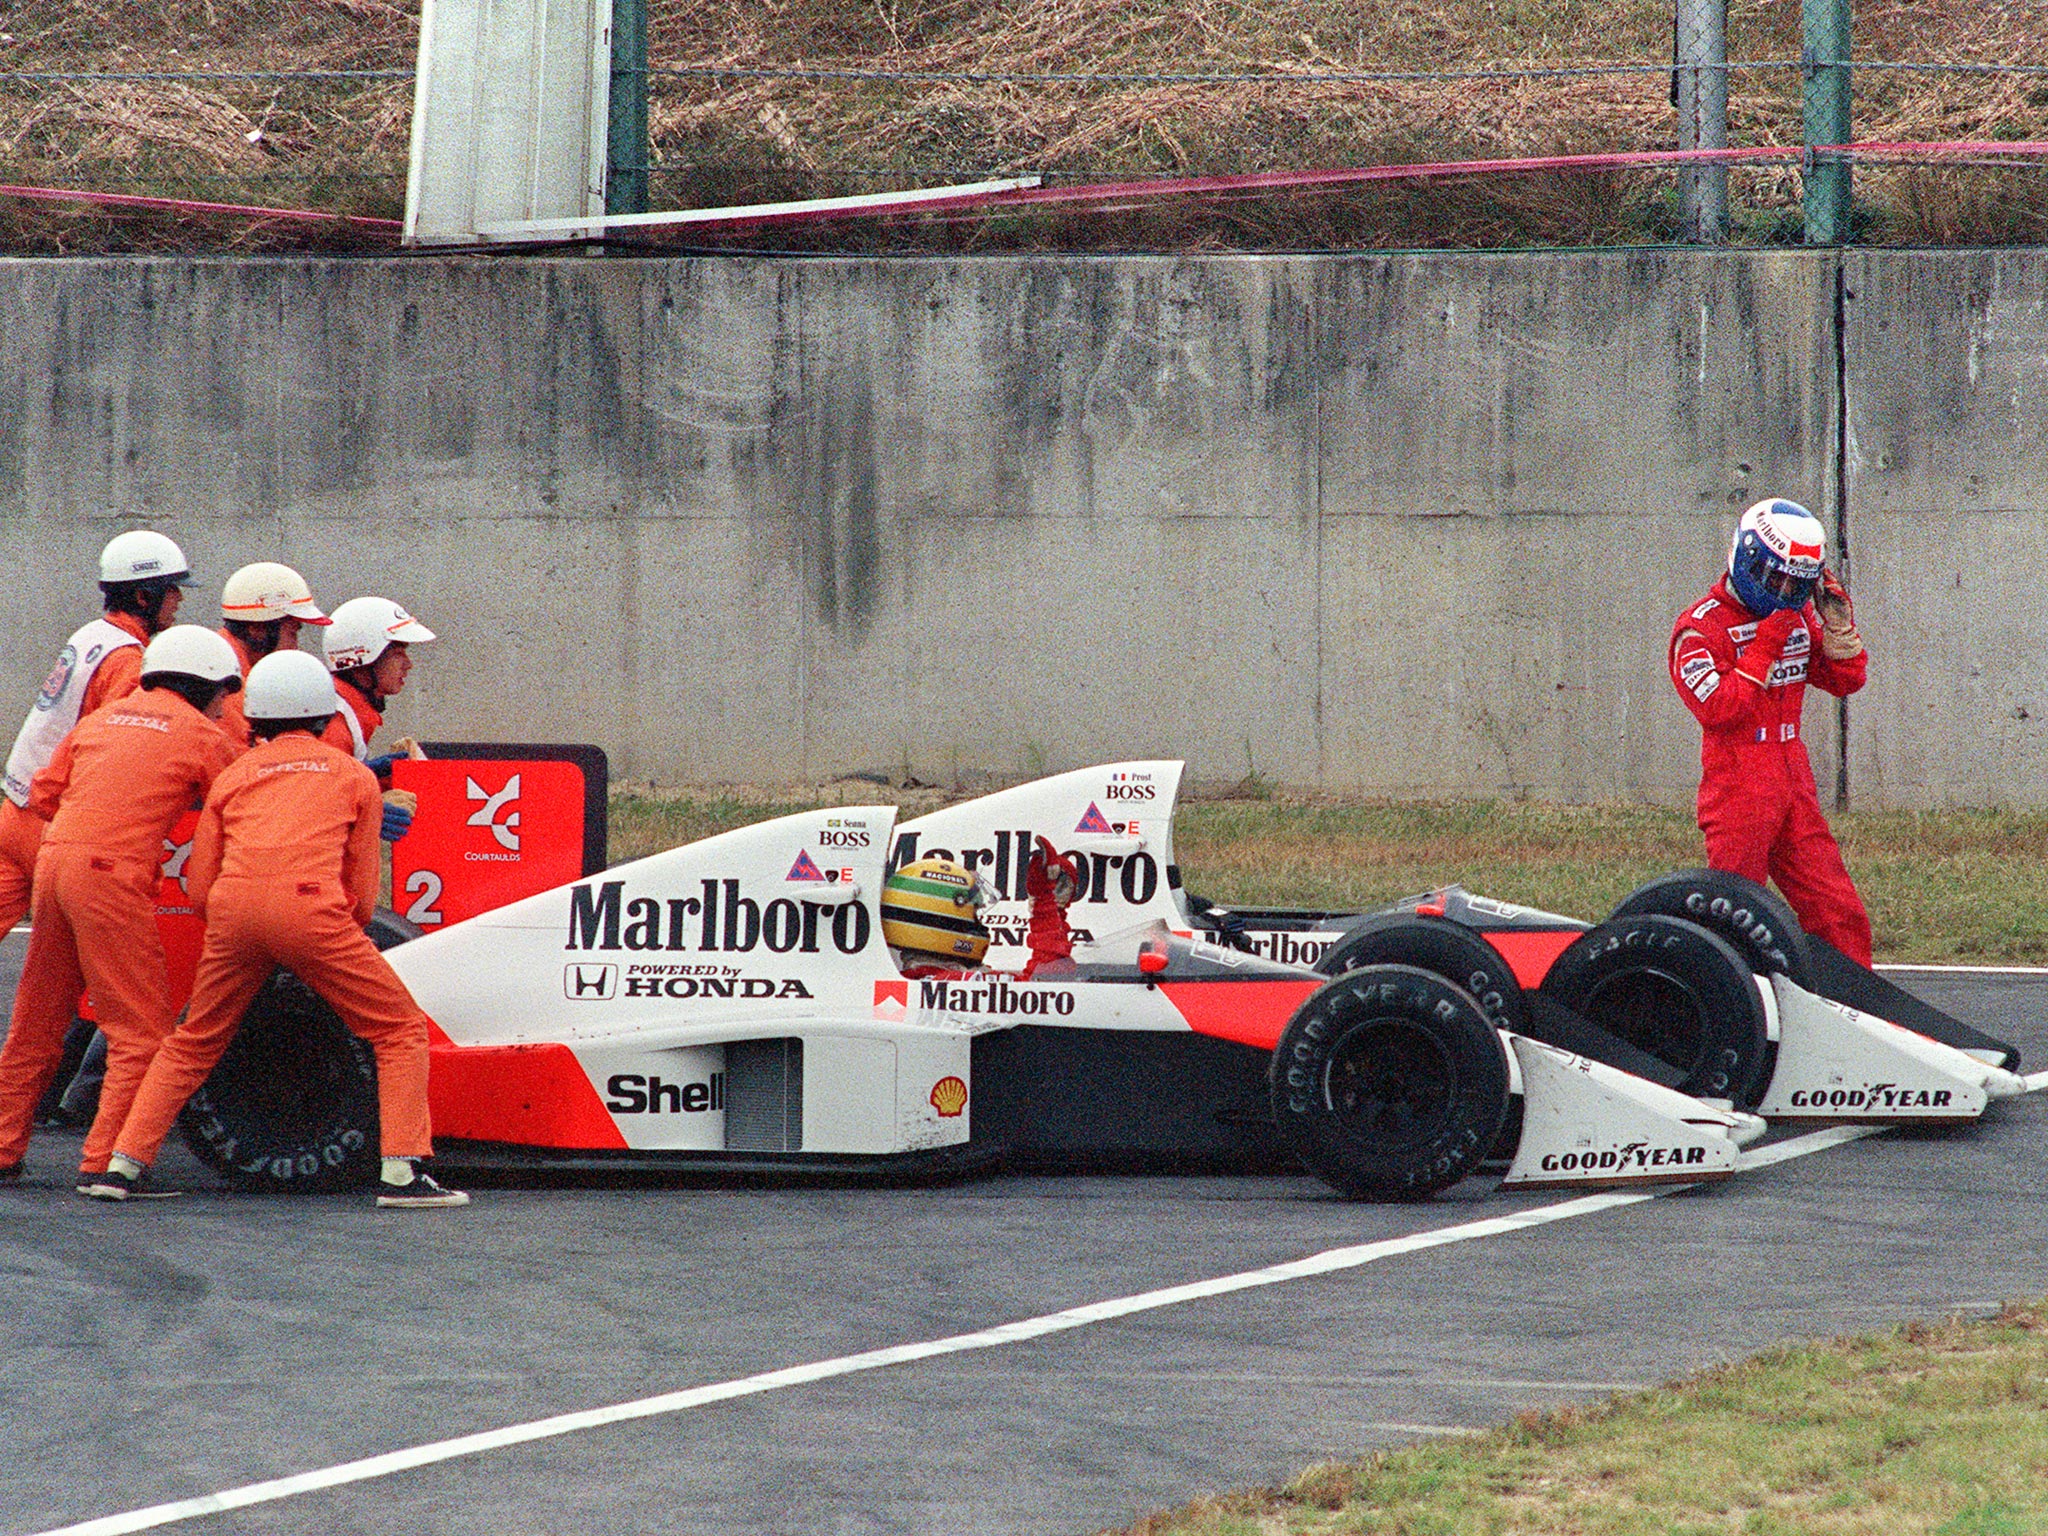 Senna and Prost collide at the 1989 Japanese Grand Prix, which later saw Senna disqualified and Prost handed the title